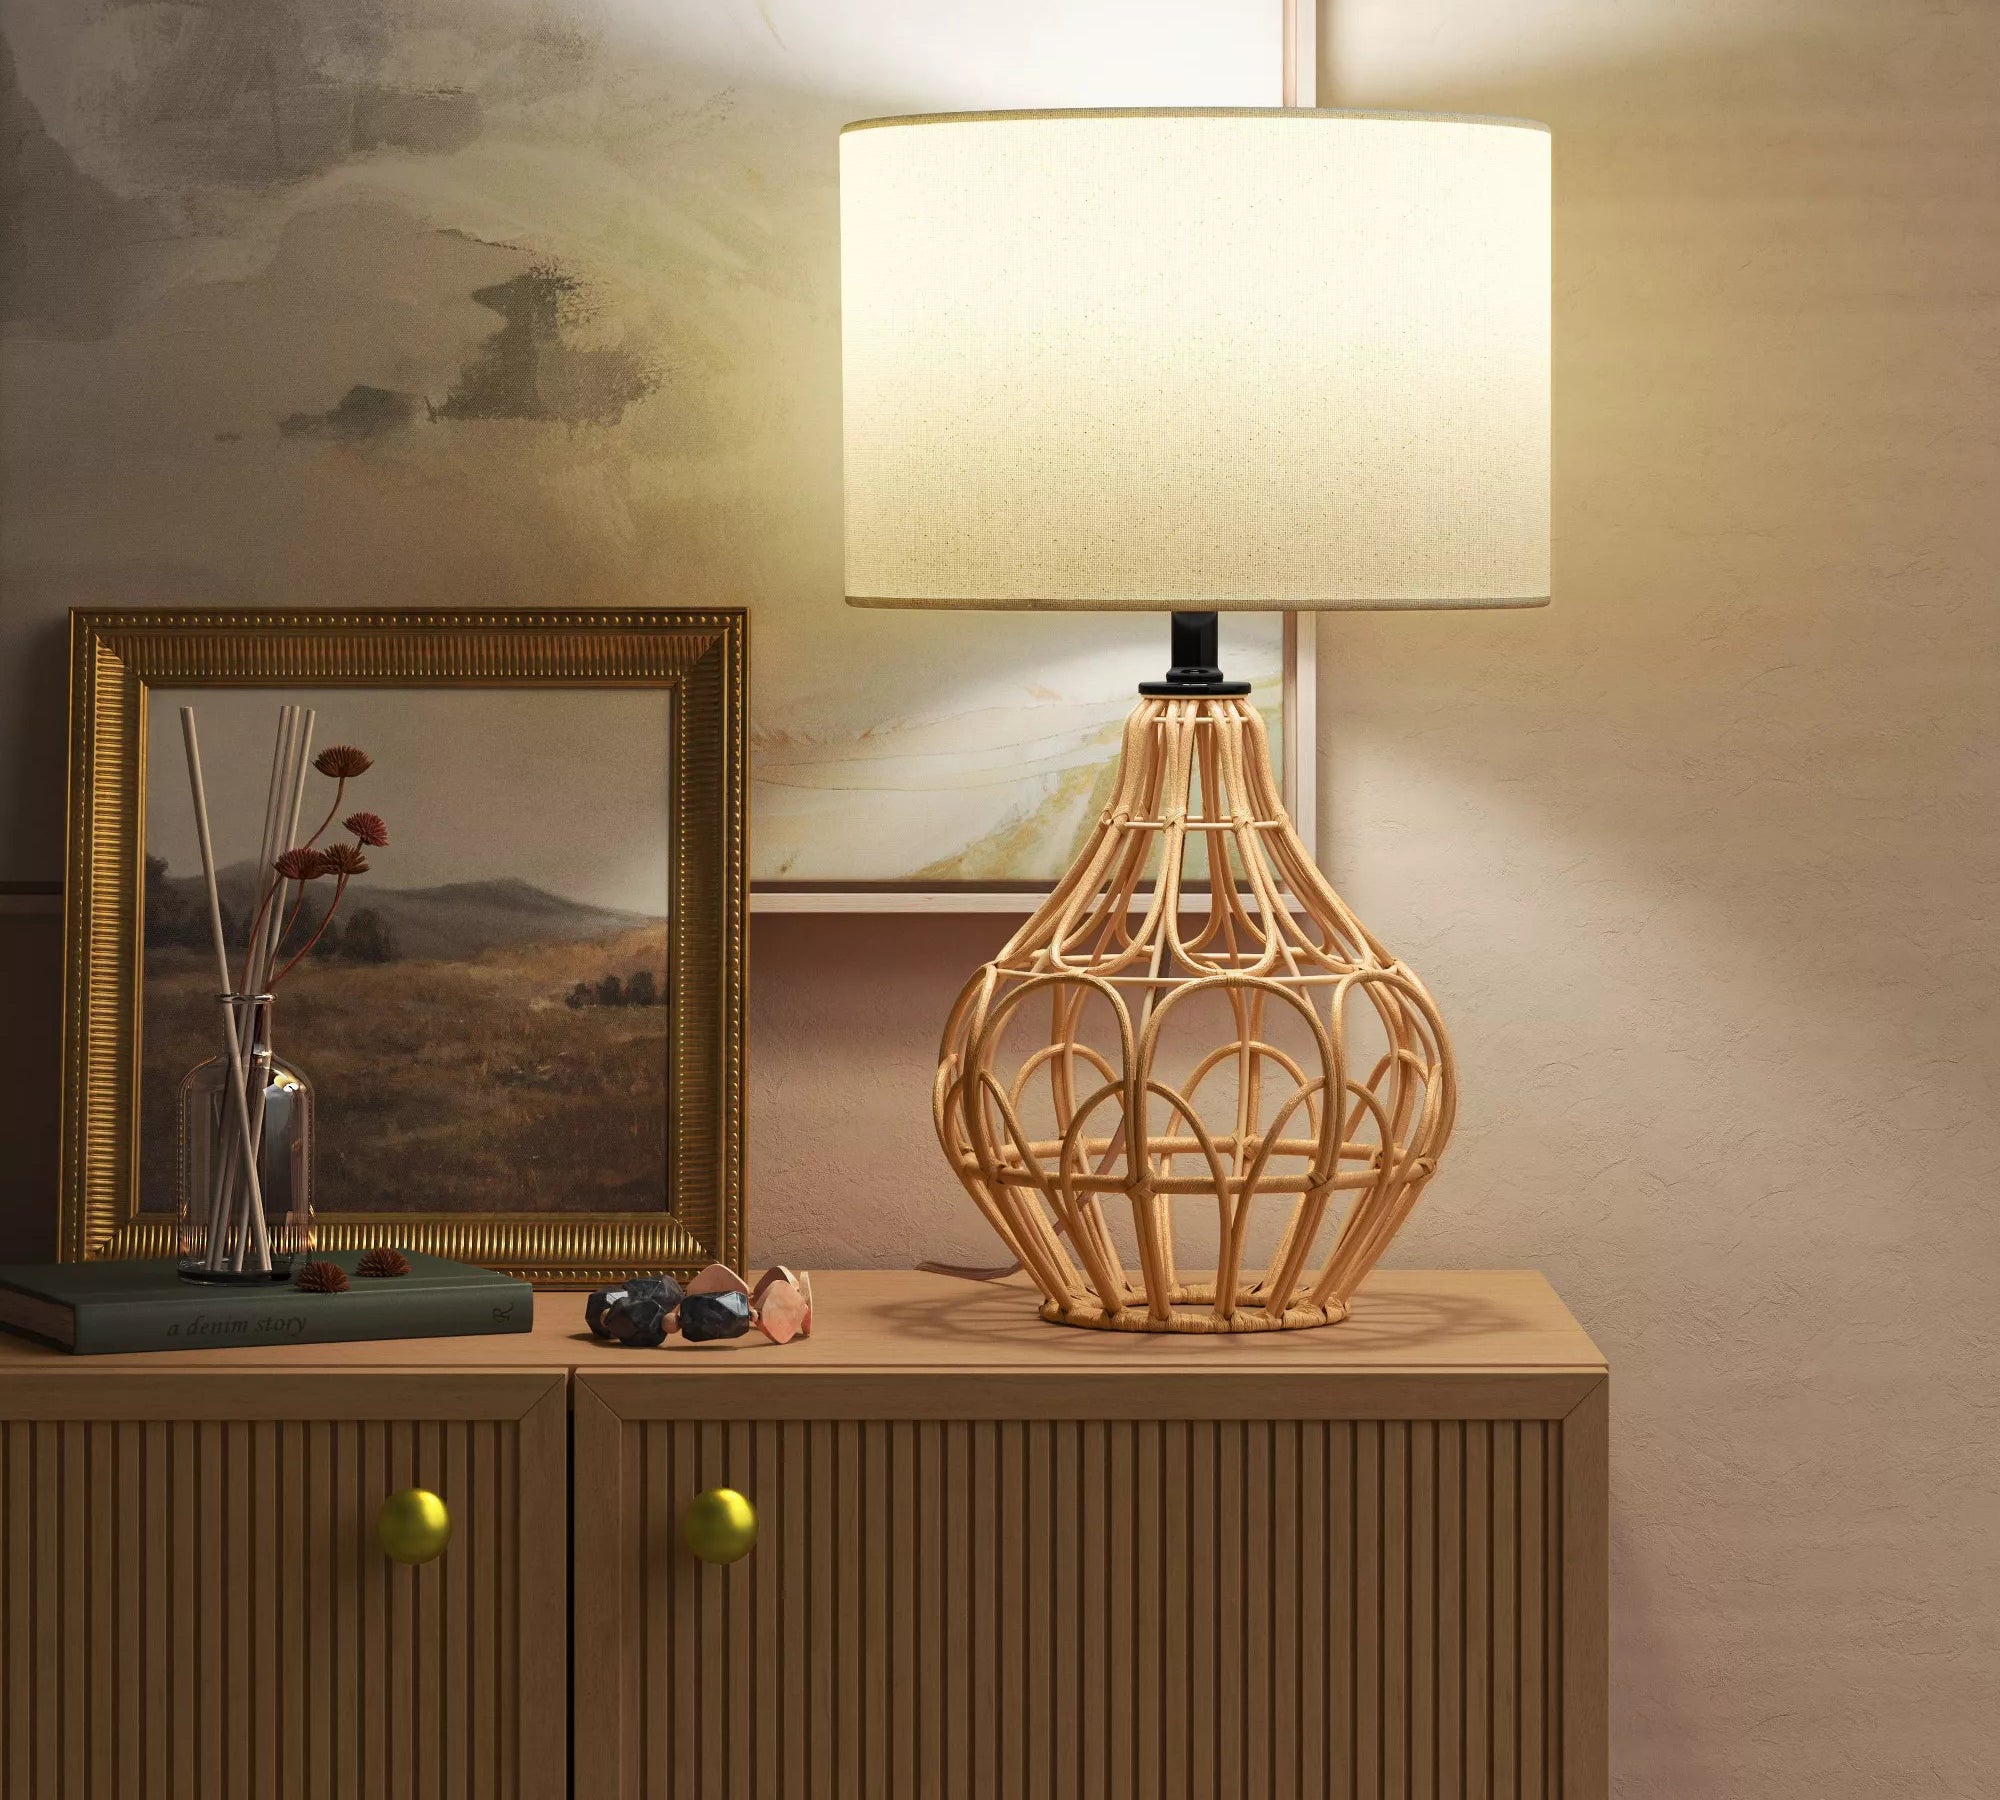 The lamp featuring a tan rattan base and a cream fabric shade